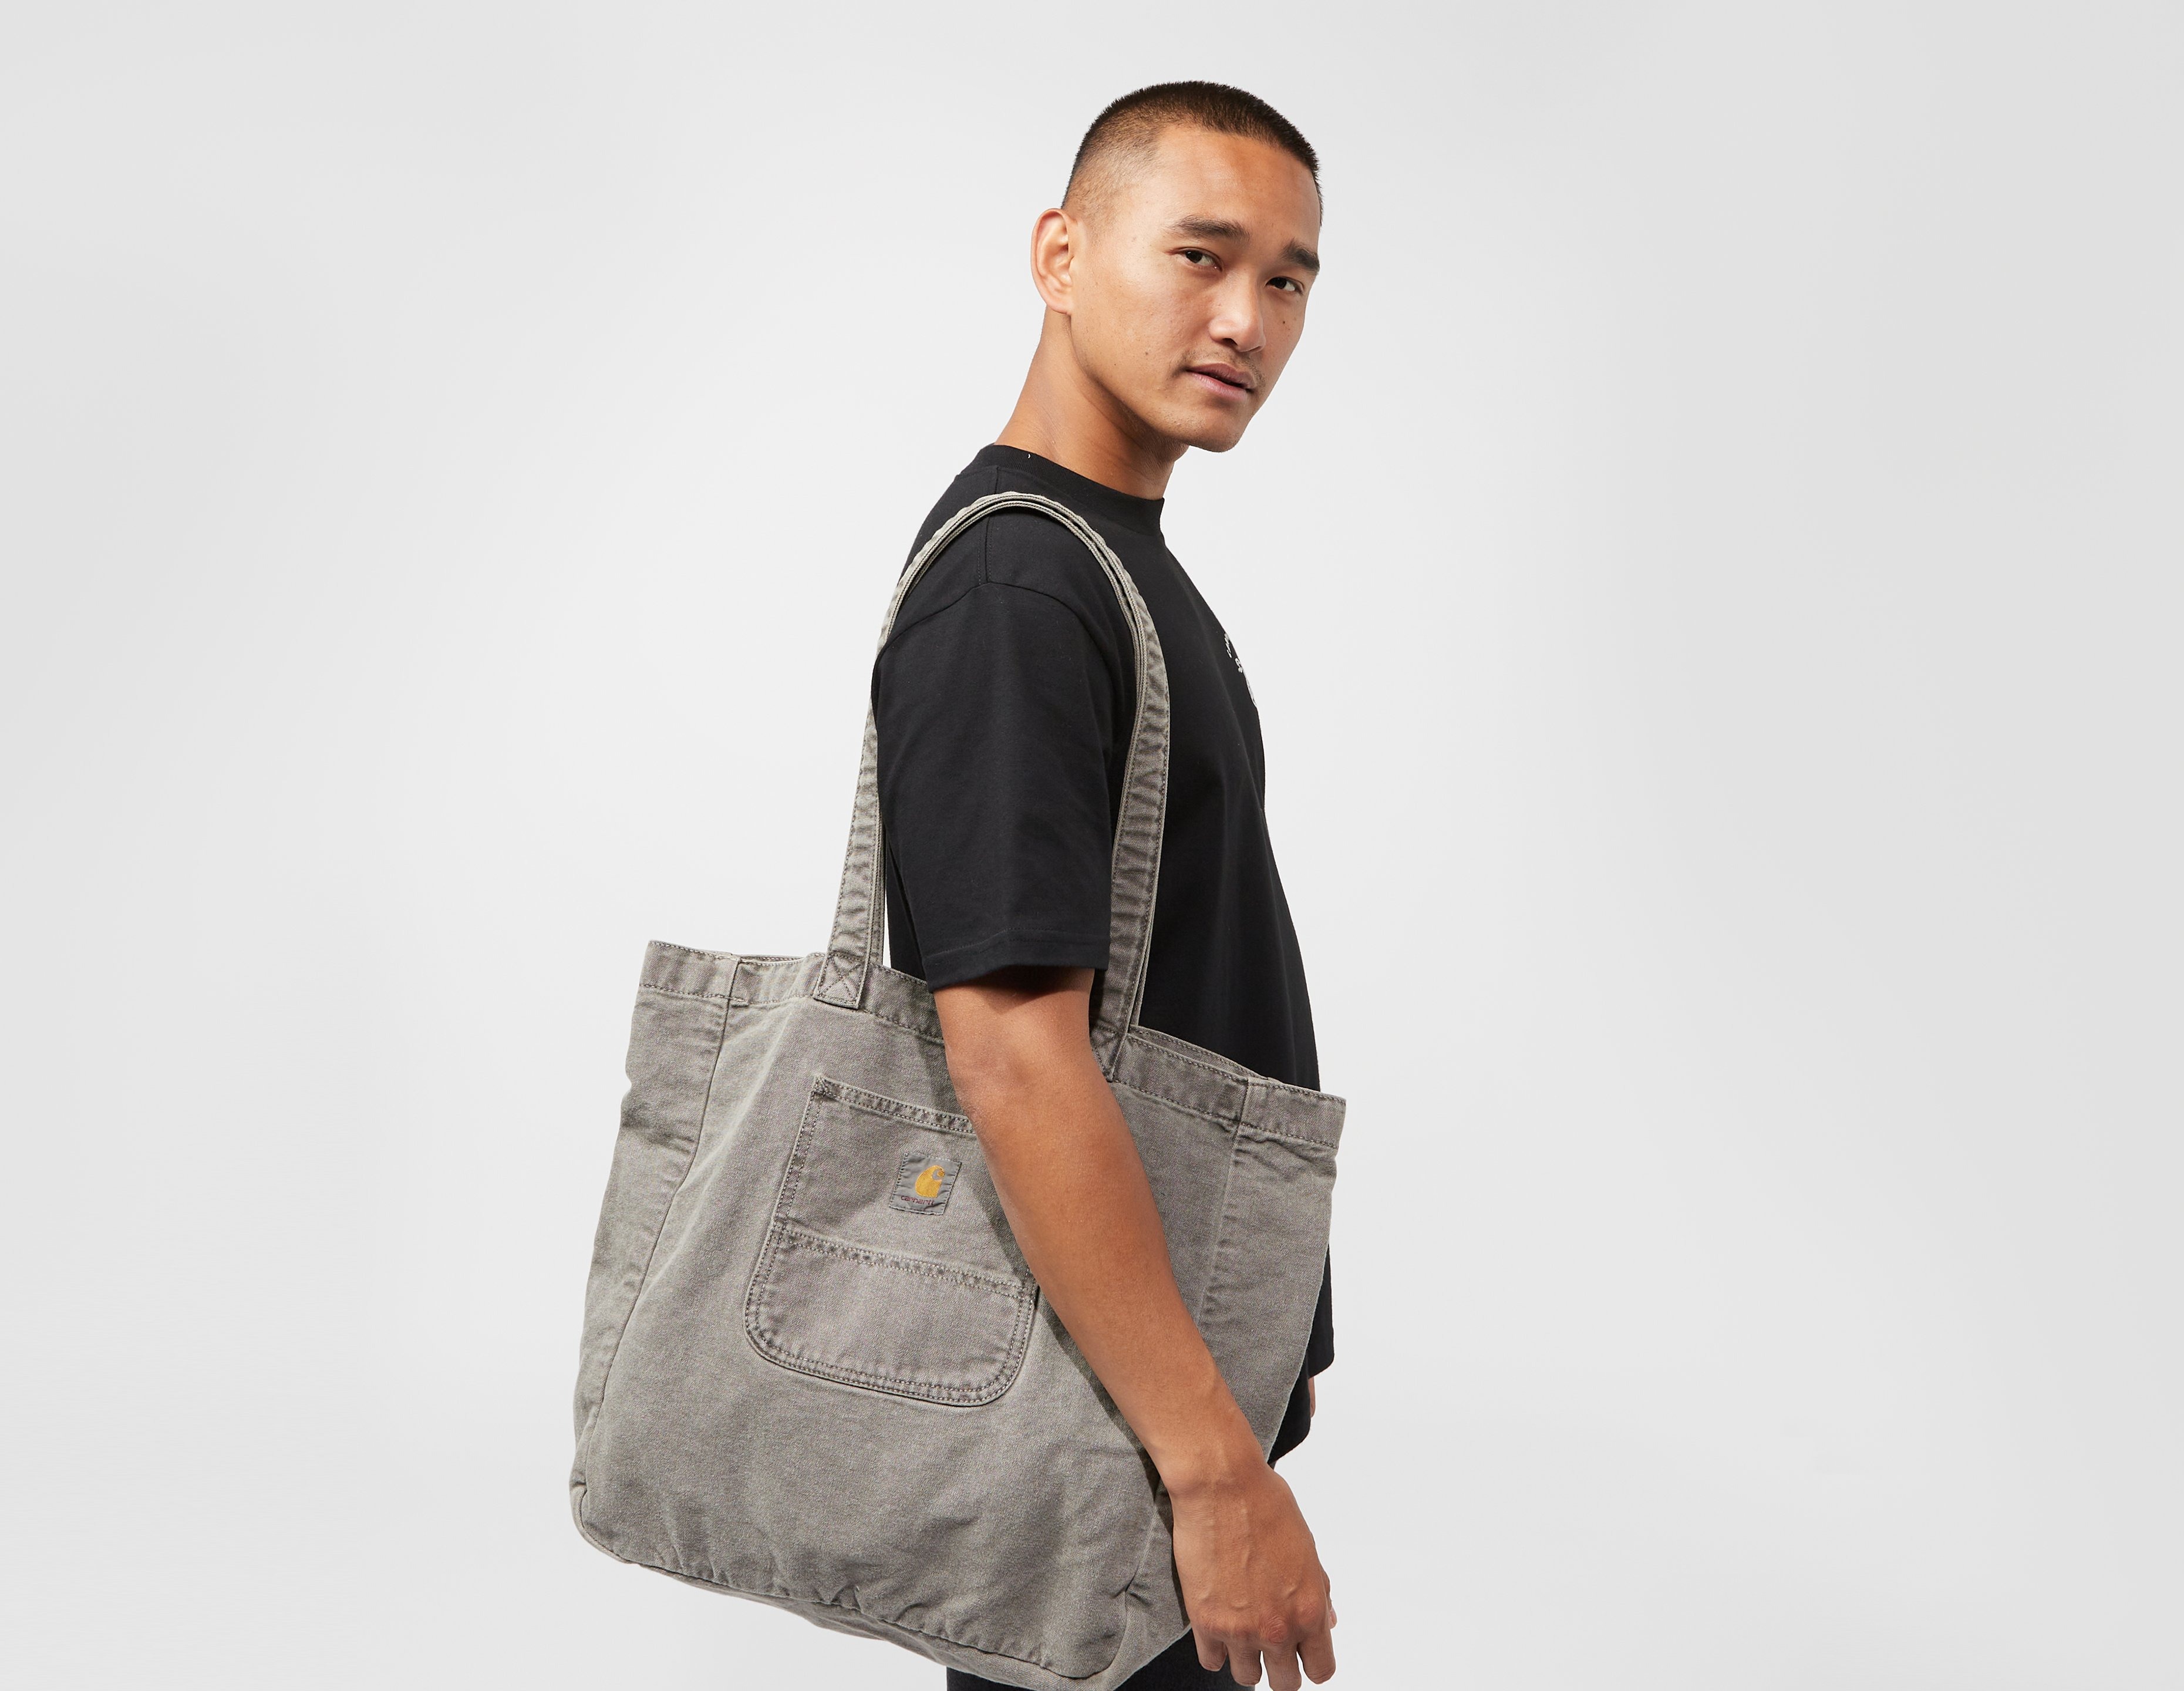 Grey Carhartt WIP Bayfield Tote Bag, Bonpoint perforated cherry clutch bag